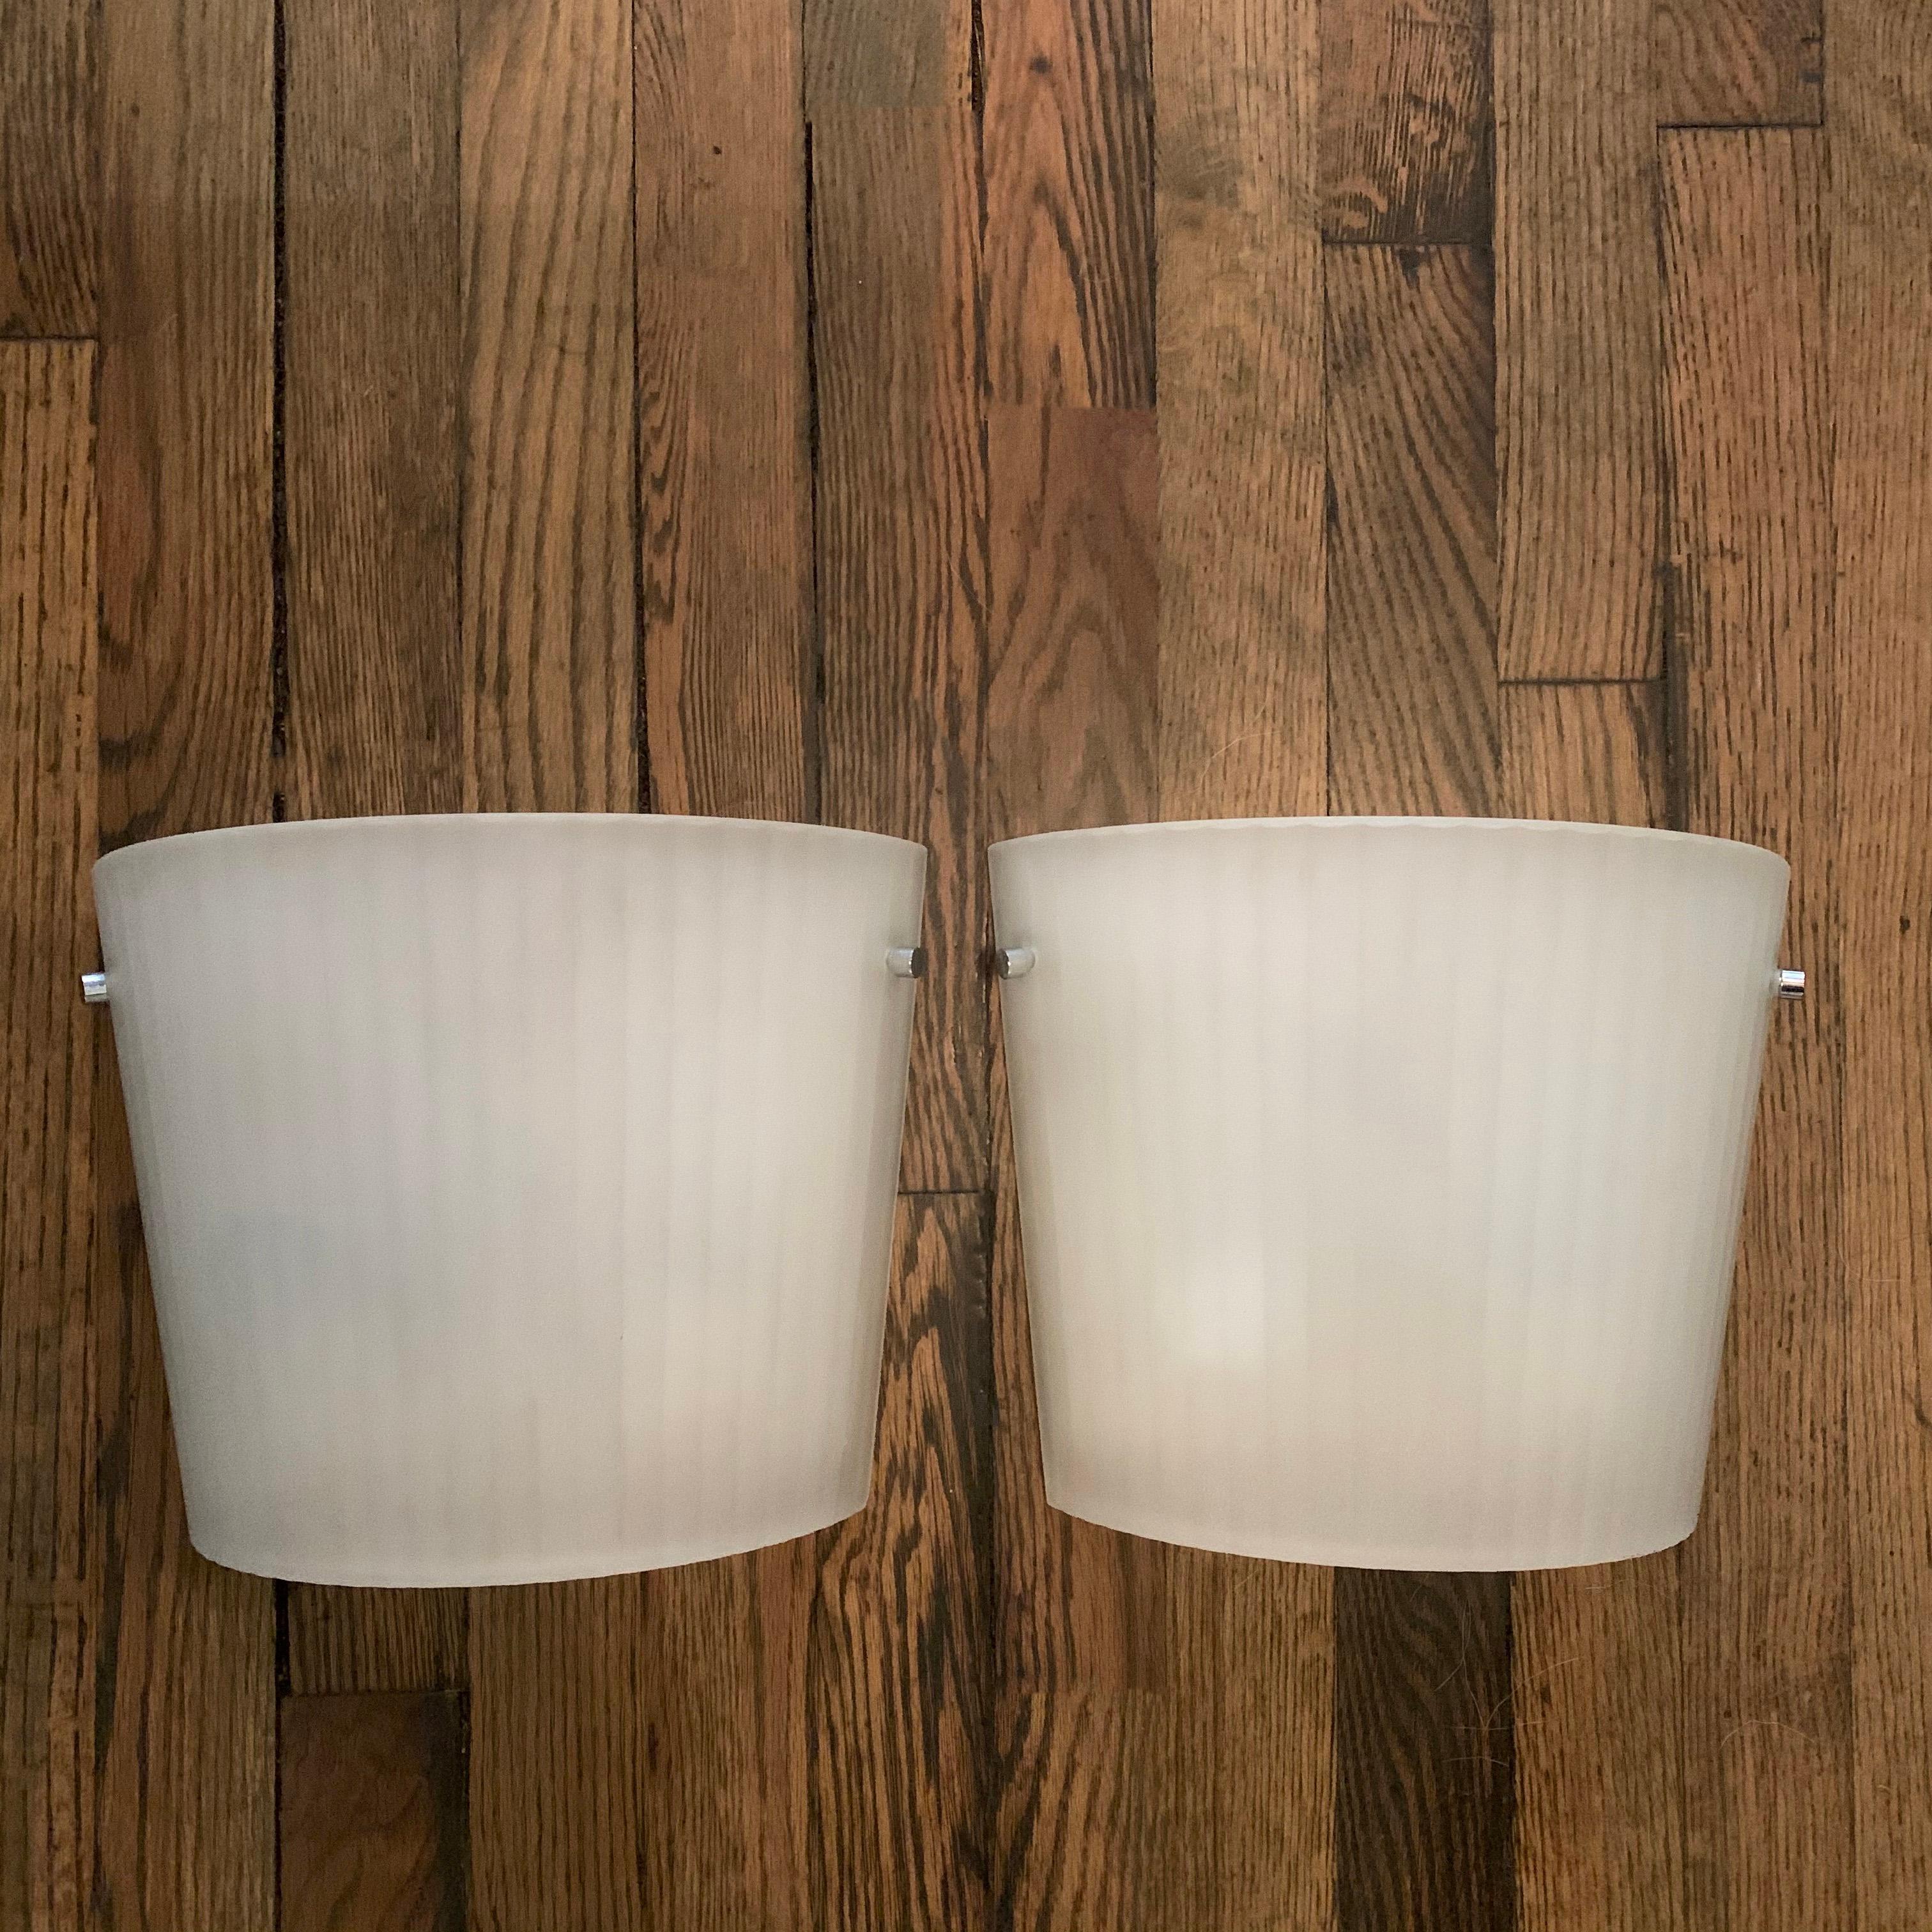 Pair of Italian, fluorescent wall sconce lights by Rodolfo Dordoni for Artemide feature curved, ribbed, frosted glass shades with chrome hardware on metal backplates. The sconces taper in height from 9 - 11 inches.